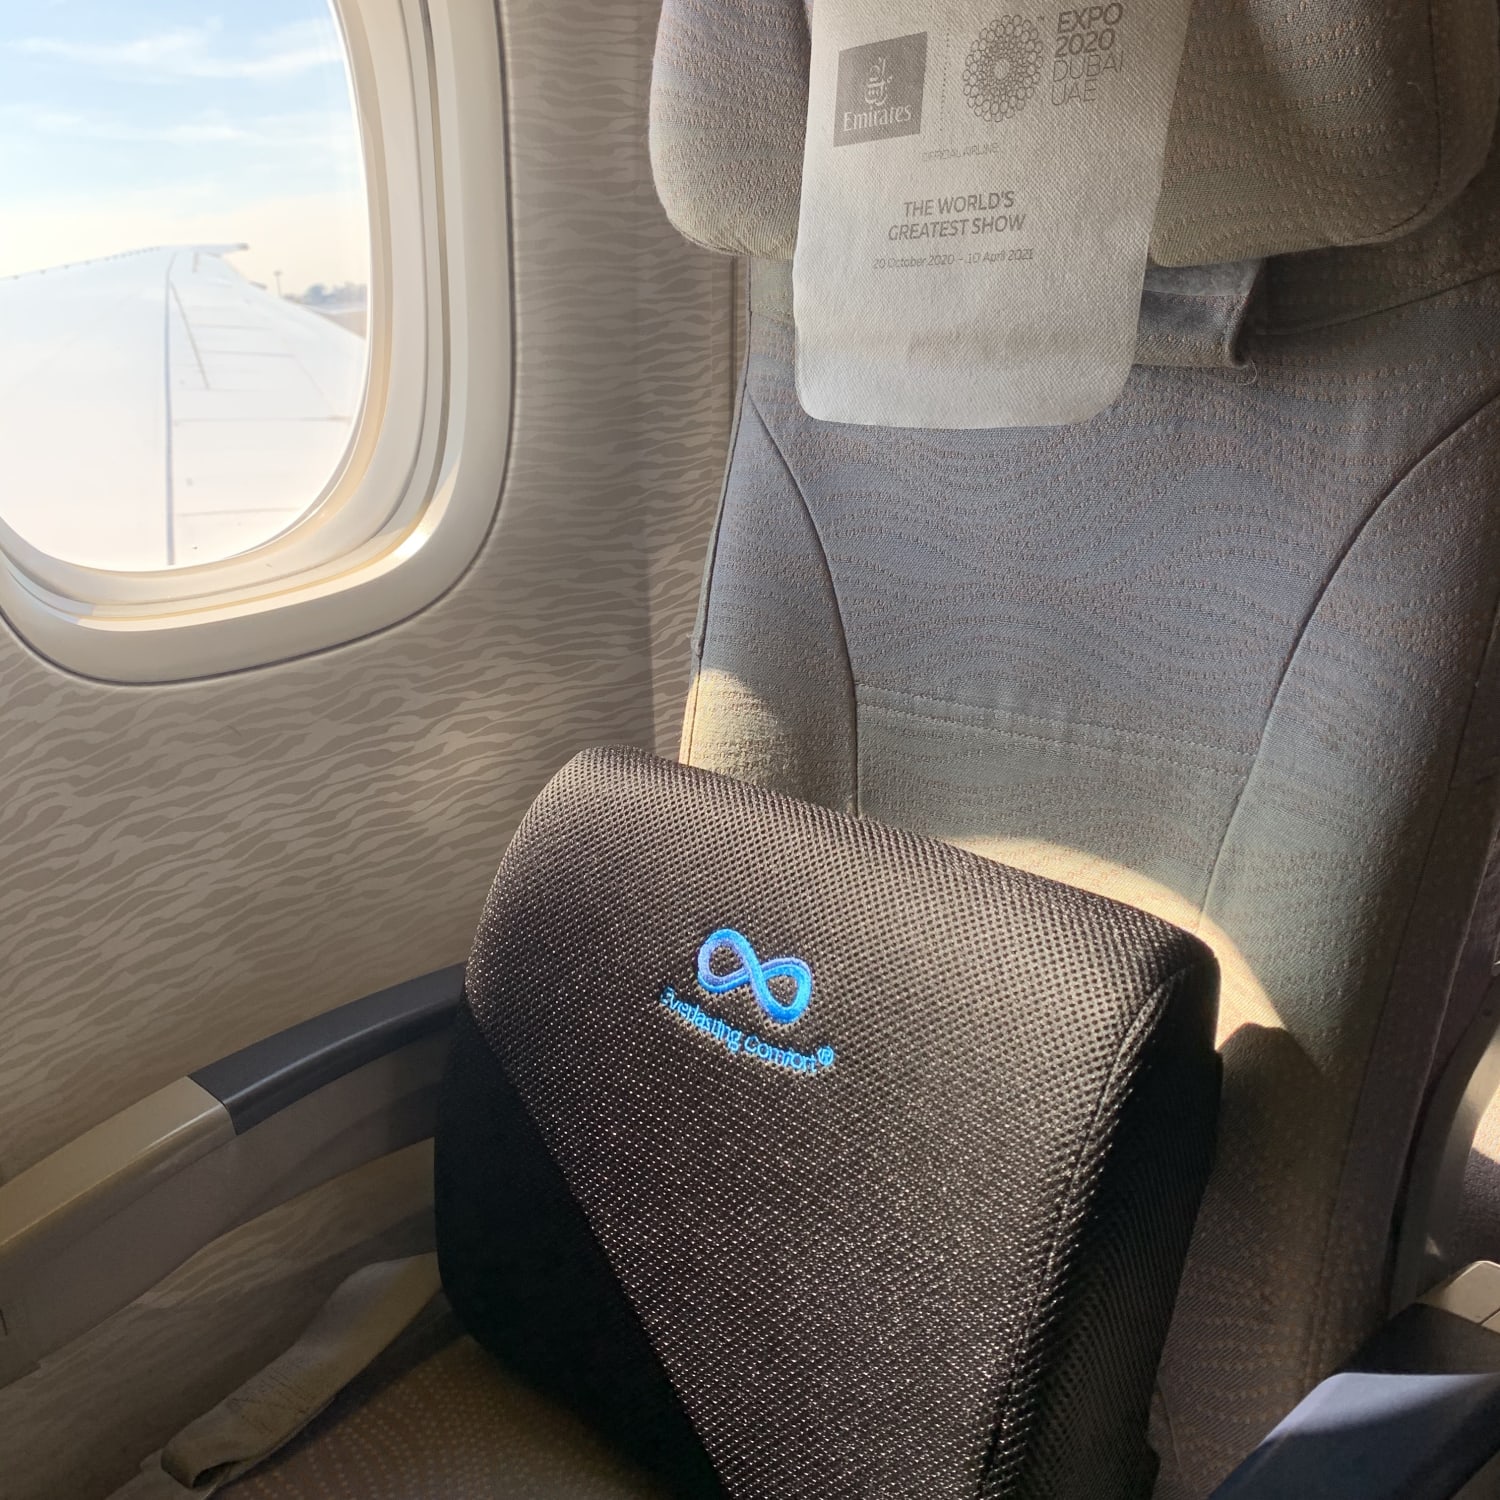 This $30 lumbar pillow is perfect for work and travel